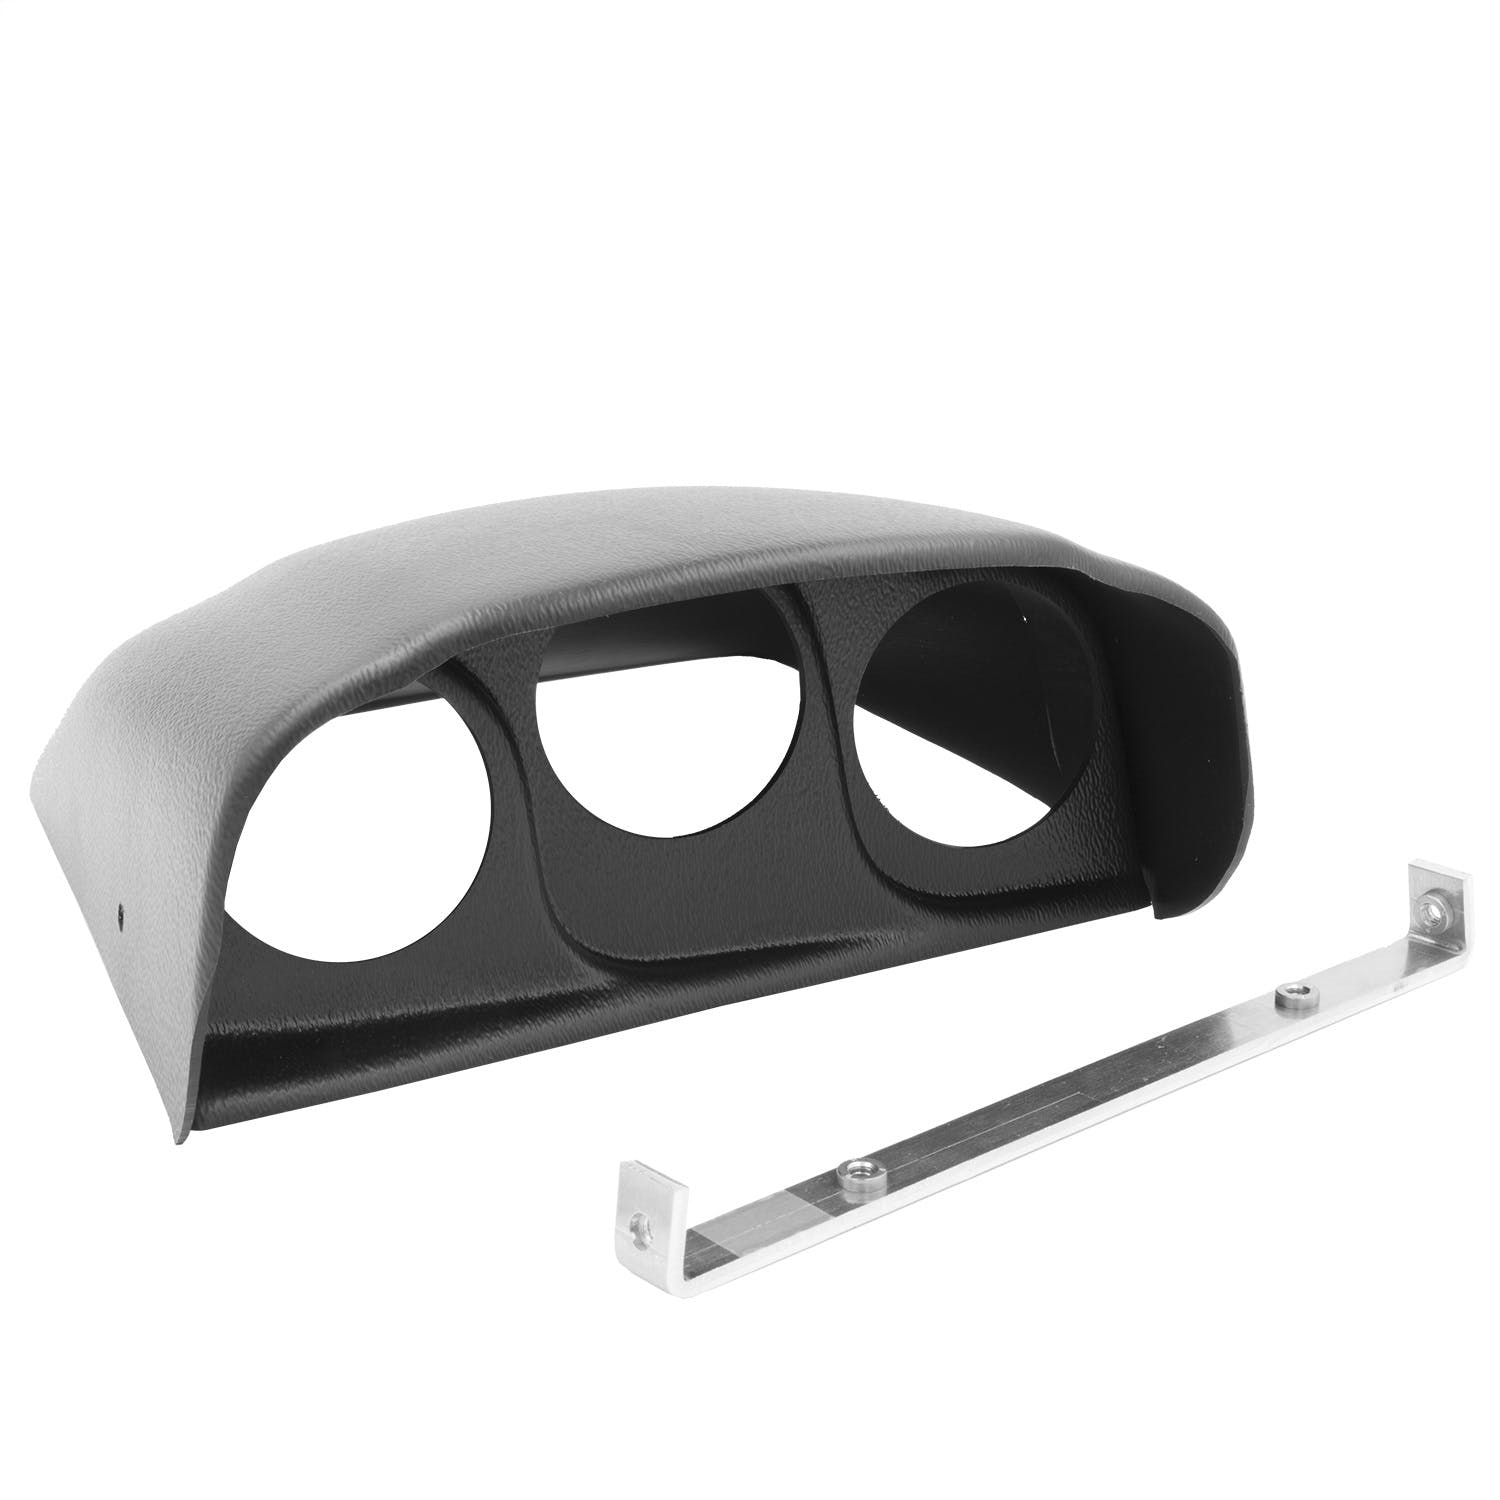 AutoMeter Products 15020 Dash-Top Triple-Gauge Pod Mount (2003-09 RAM, 2-1/16 in.)